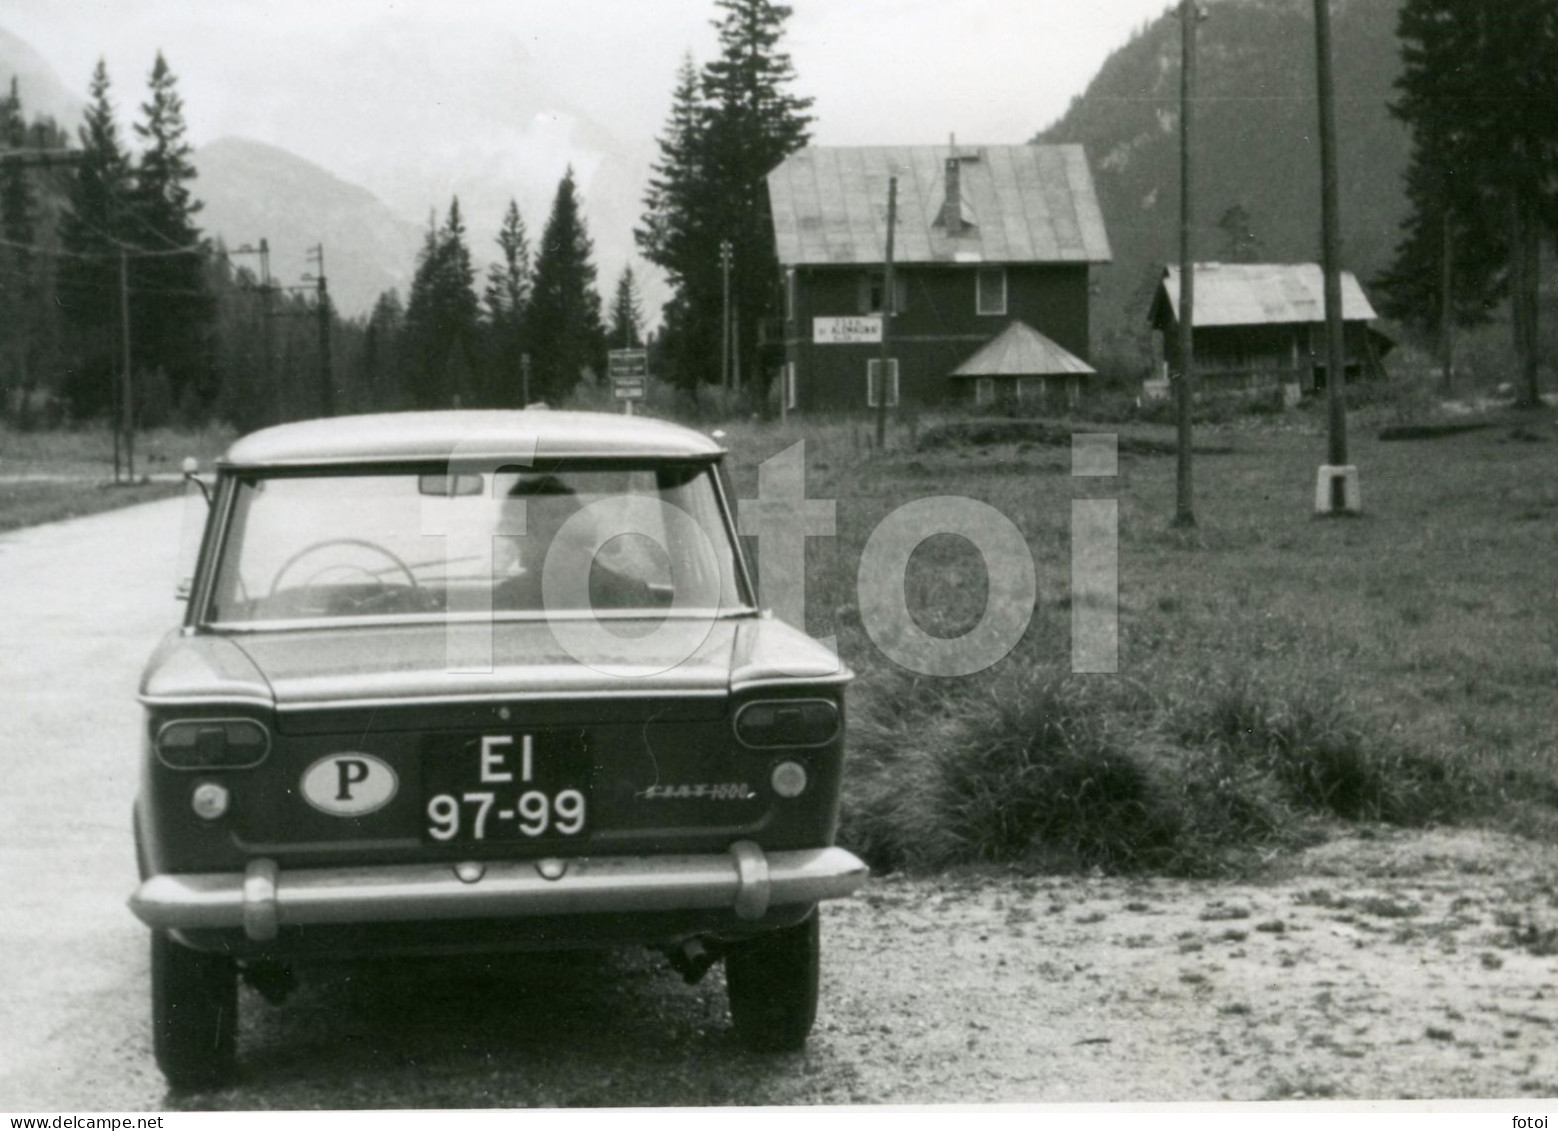 1965 REAL PHOTO FOTO FIAT 1500 CAR TRAVELLING EUROPE DEUTSCHLAND AT155 - Cars